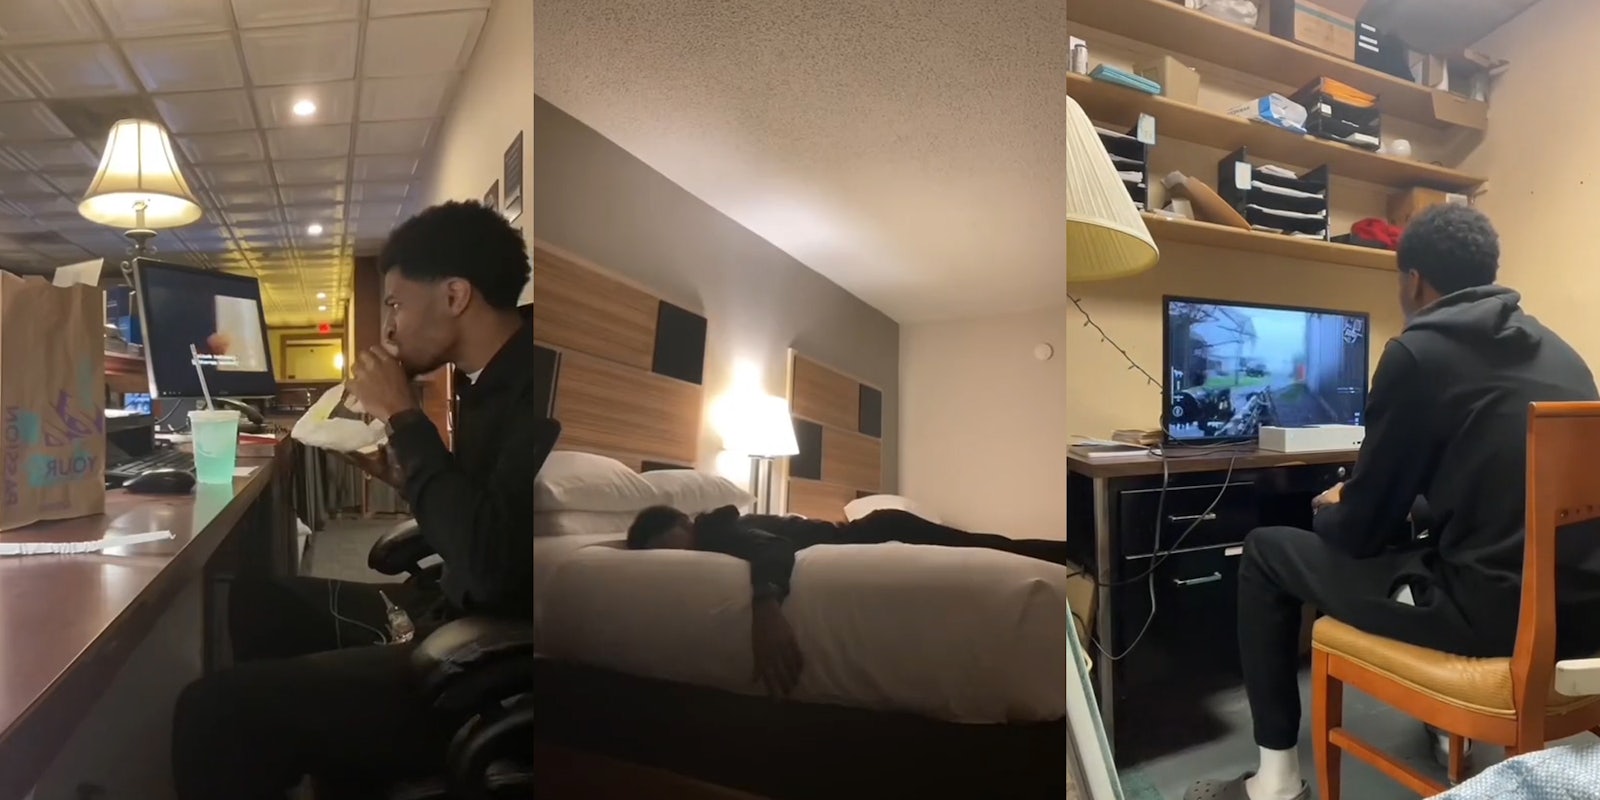 man eating Taco Bell at receptionist desk while watching a movie while working at hotel night shift (l) man sleeping in hotel bed while working during night shift (c) man playing Call of Duty Vanguard while working night shift at hotel (r)